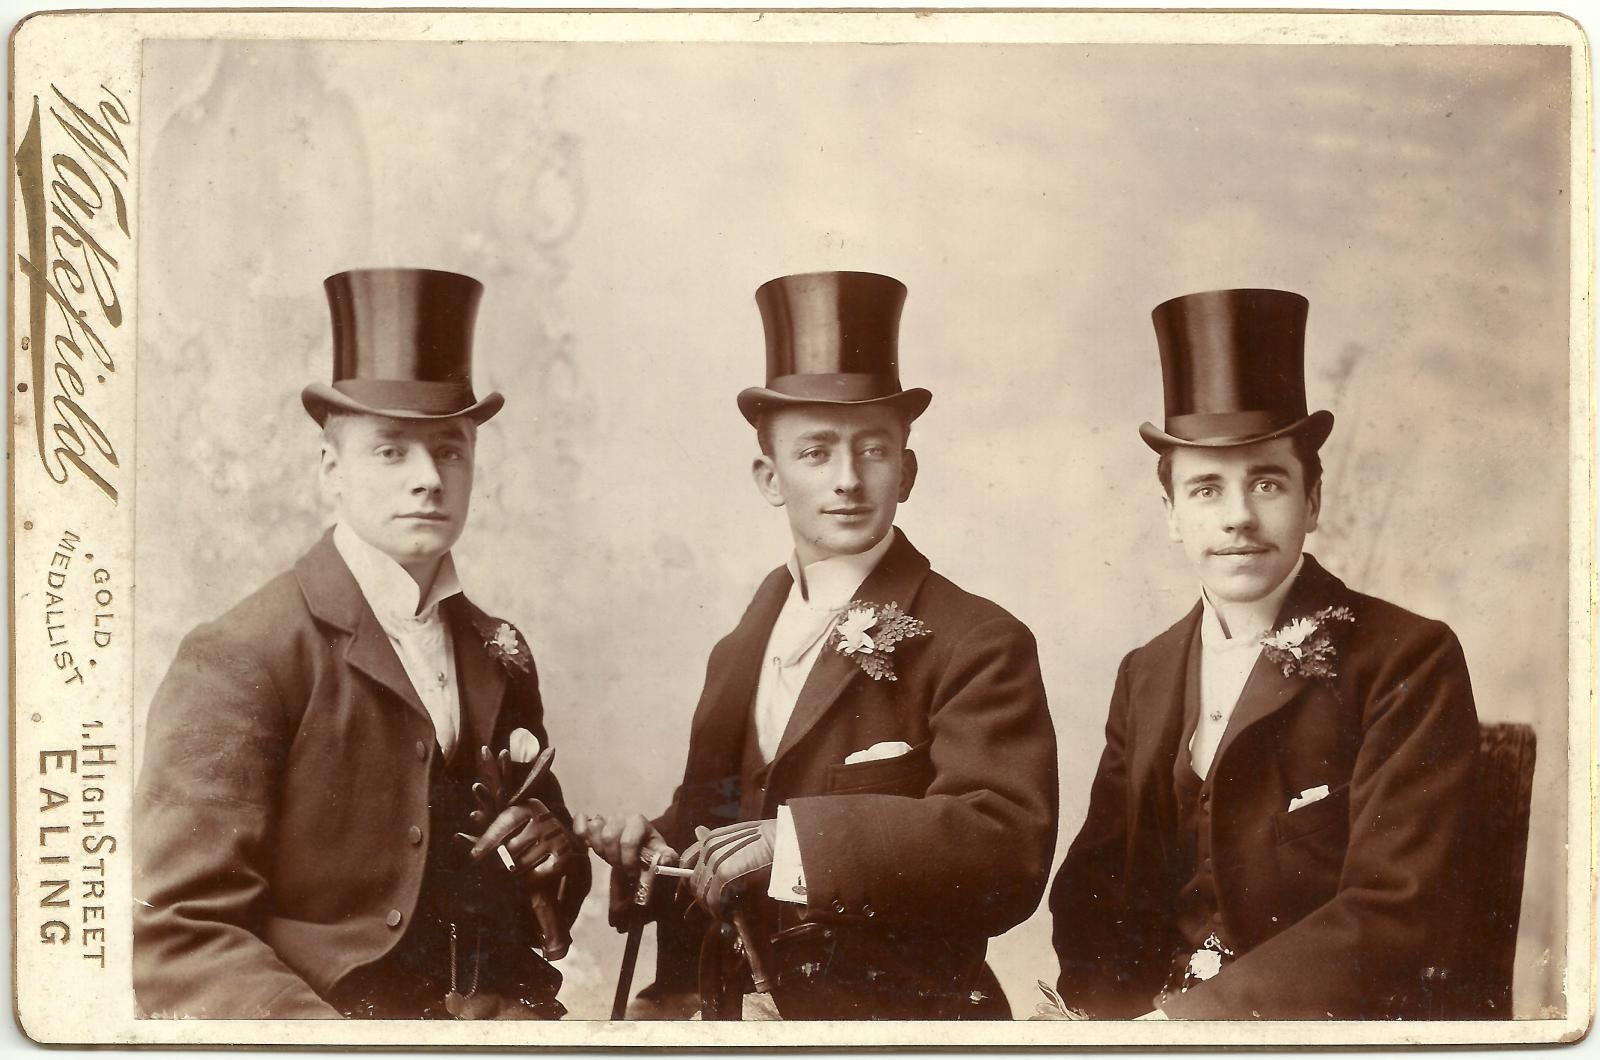 The Rich History of the Top Hat